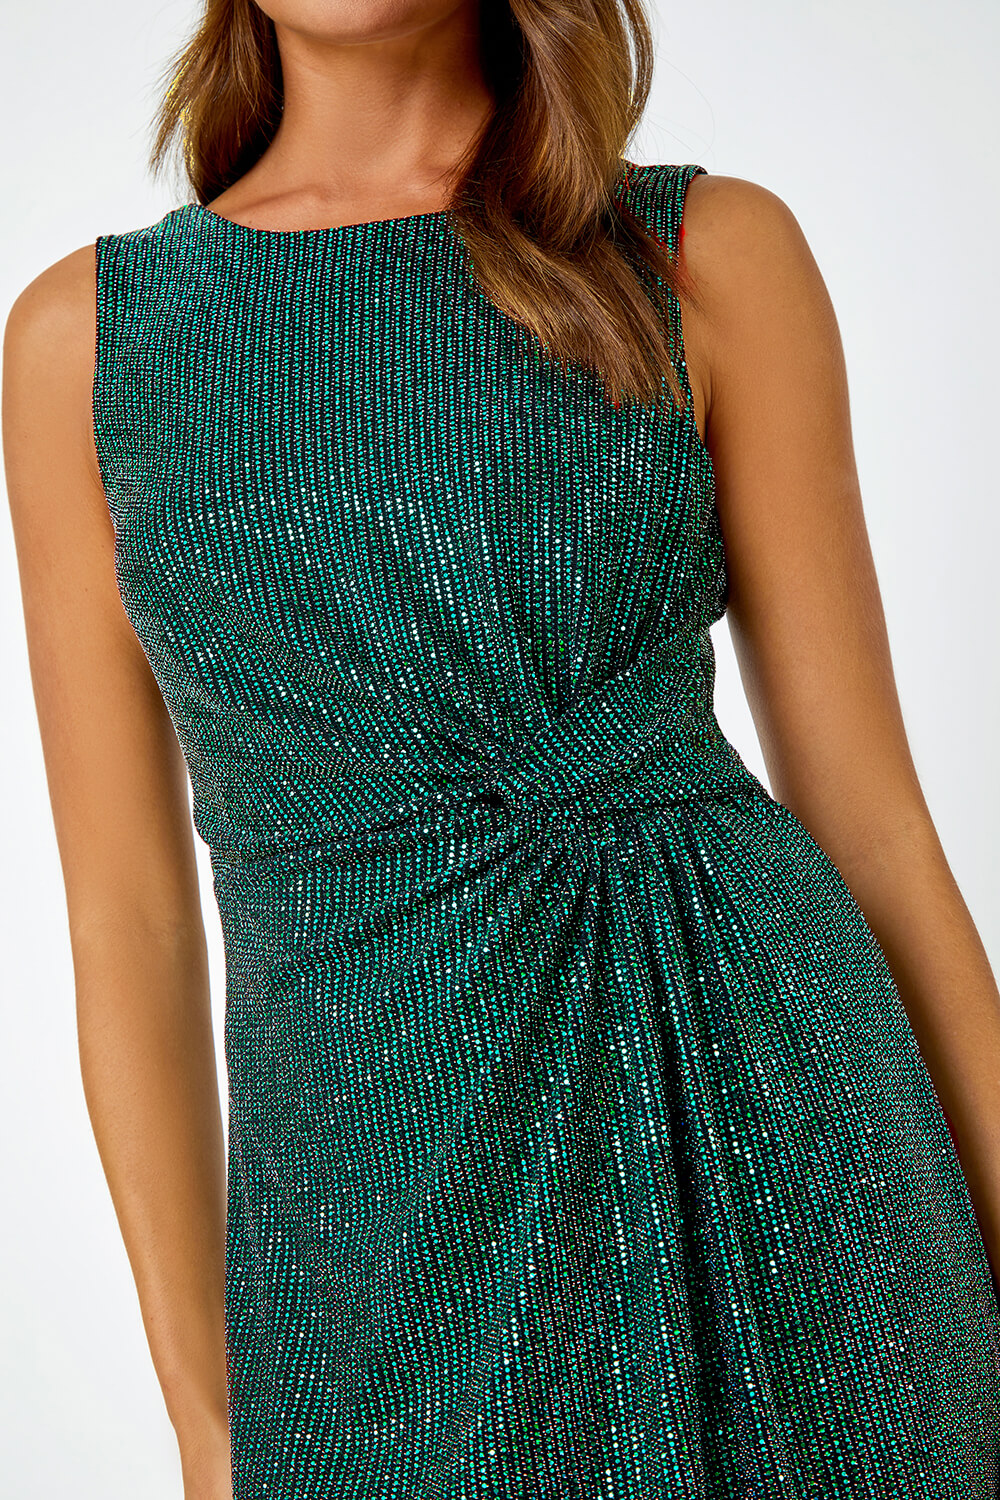 Emerald Sequin Side Twist Stretch Dress, Image 5 of 5